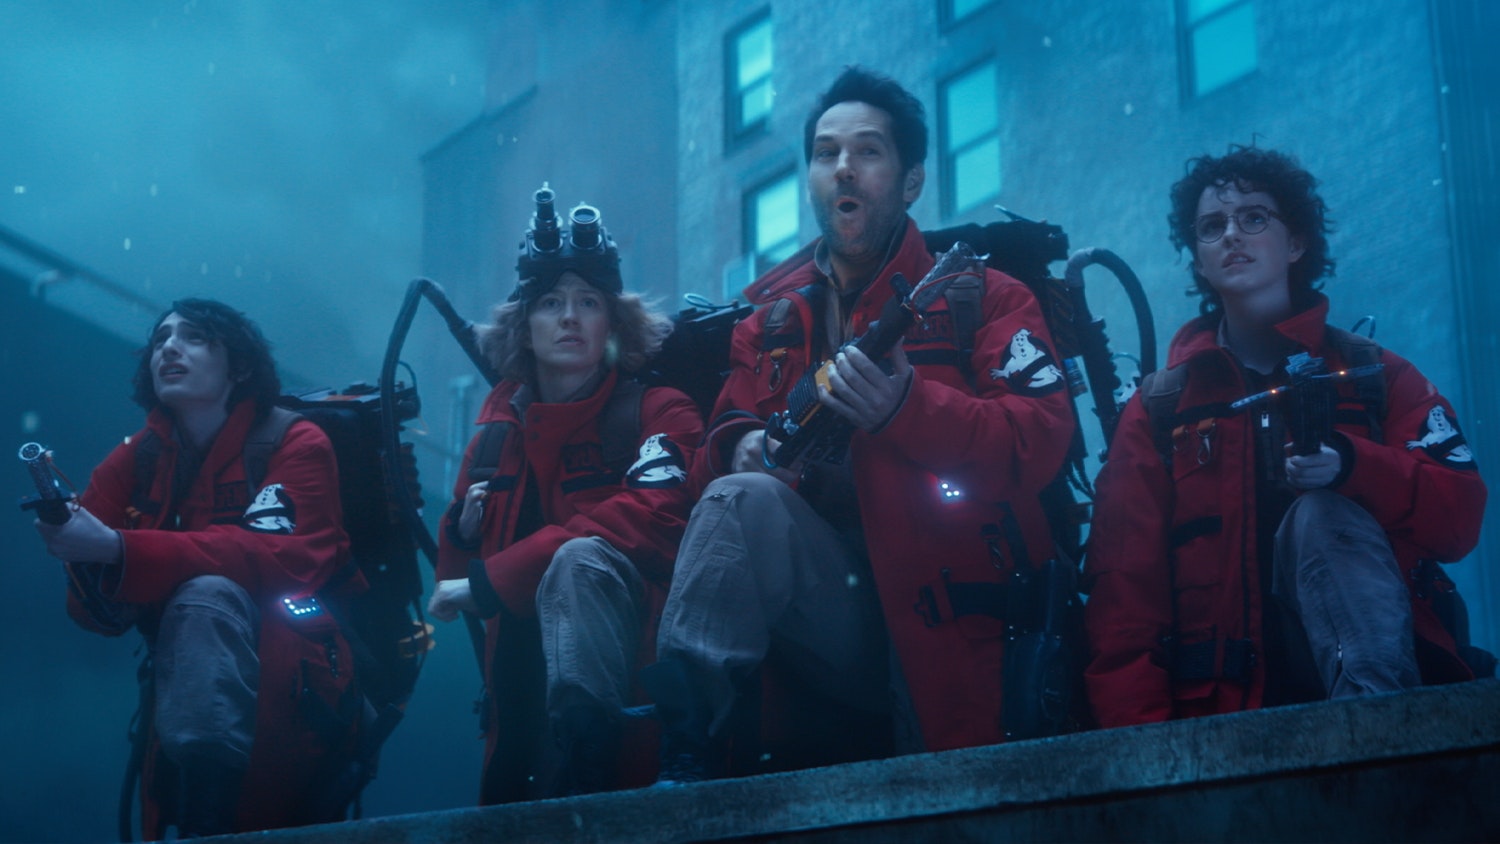 Ghostbusters Frozen Empire Unites The Old And New Generation In New York